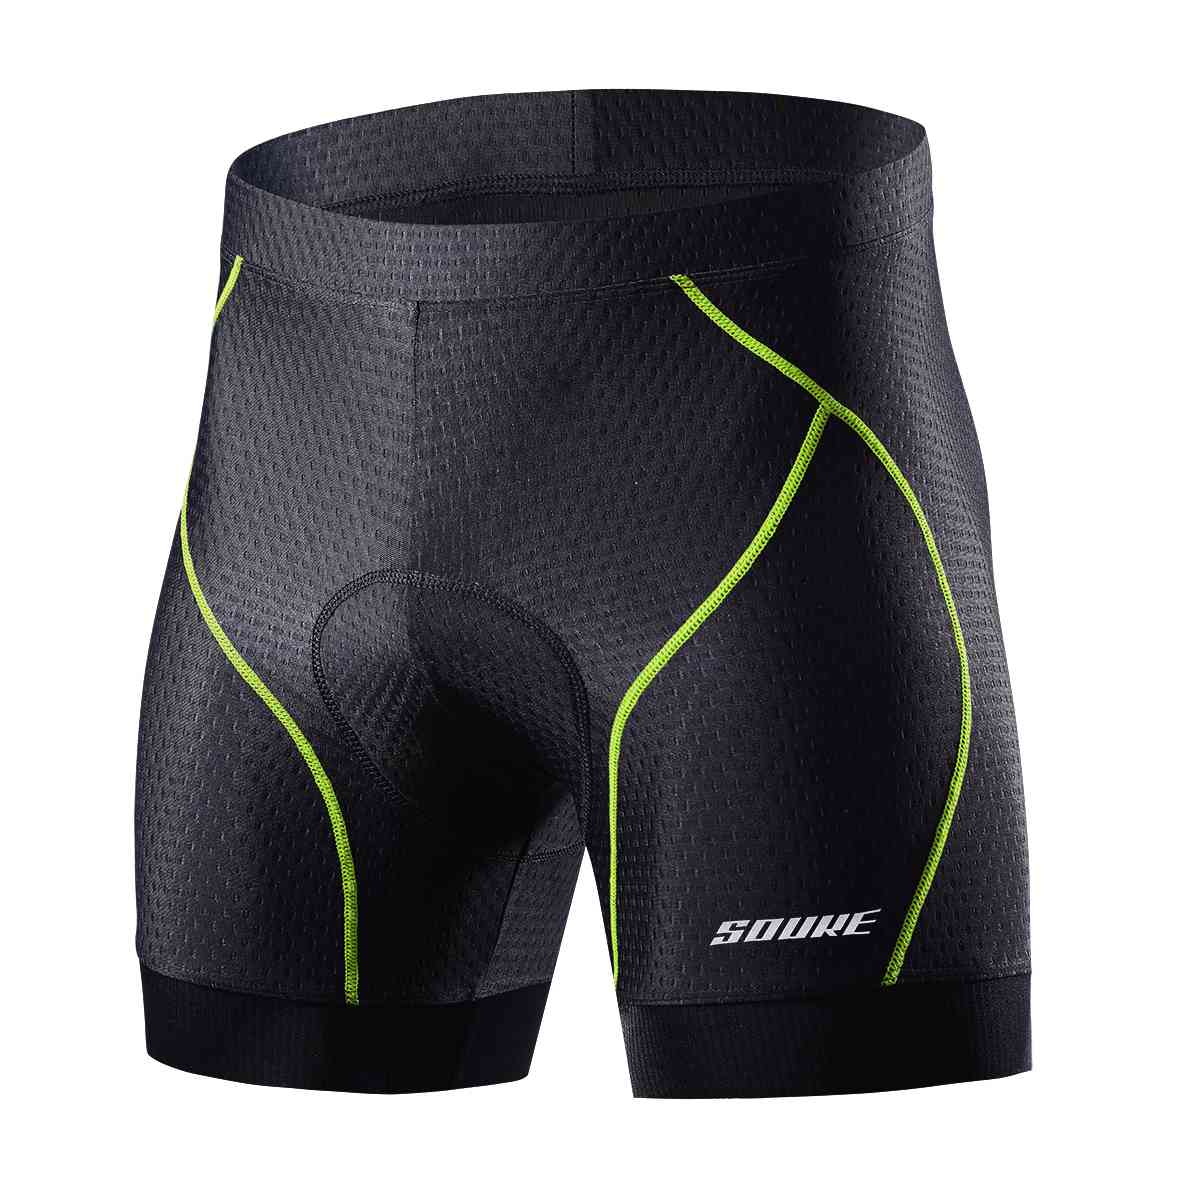 Cycling Underwear, Padded Shorts & Boxers